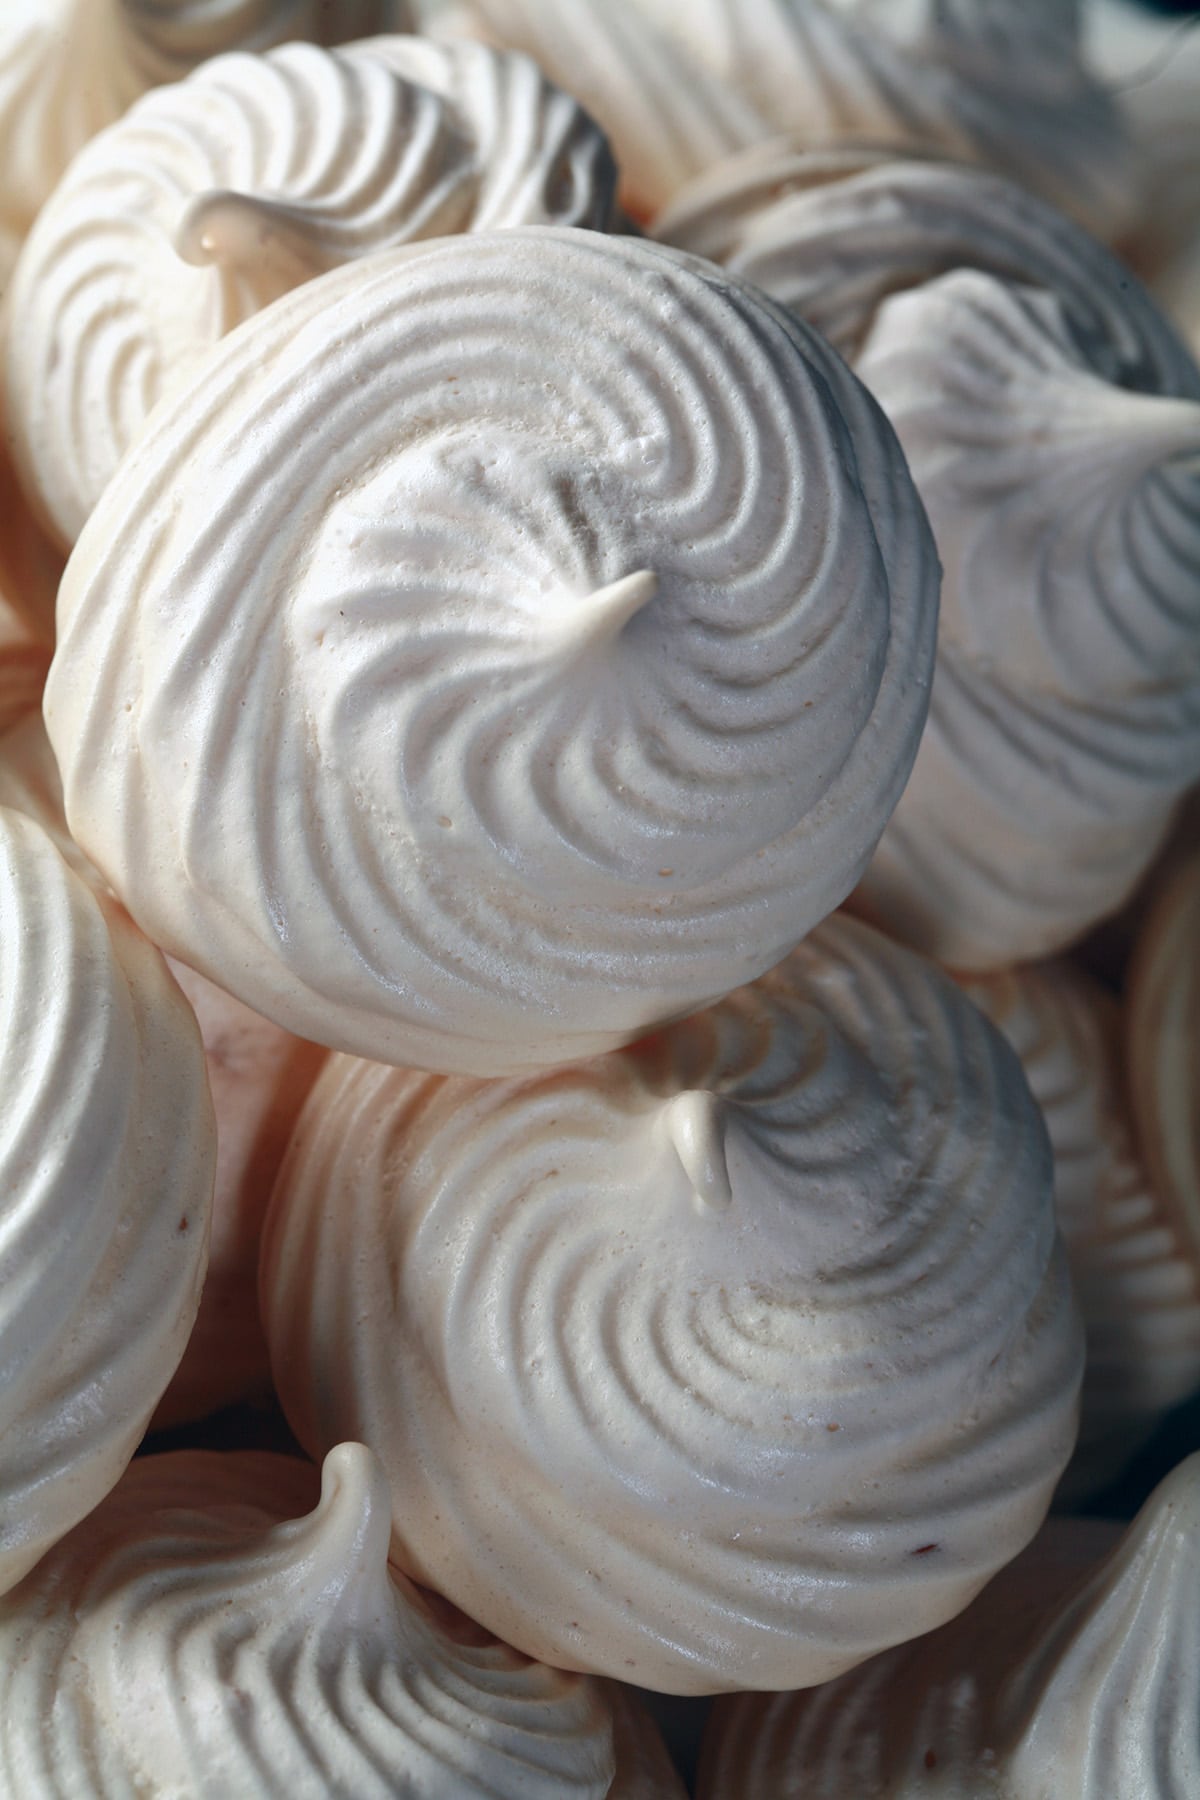 A plate piled high with swirl shaped malted milk meringue cookies.